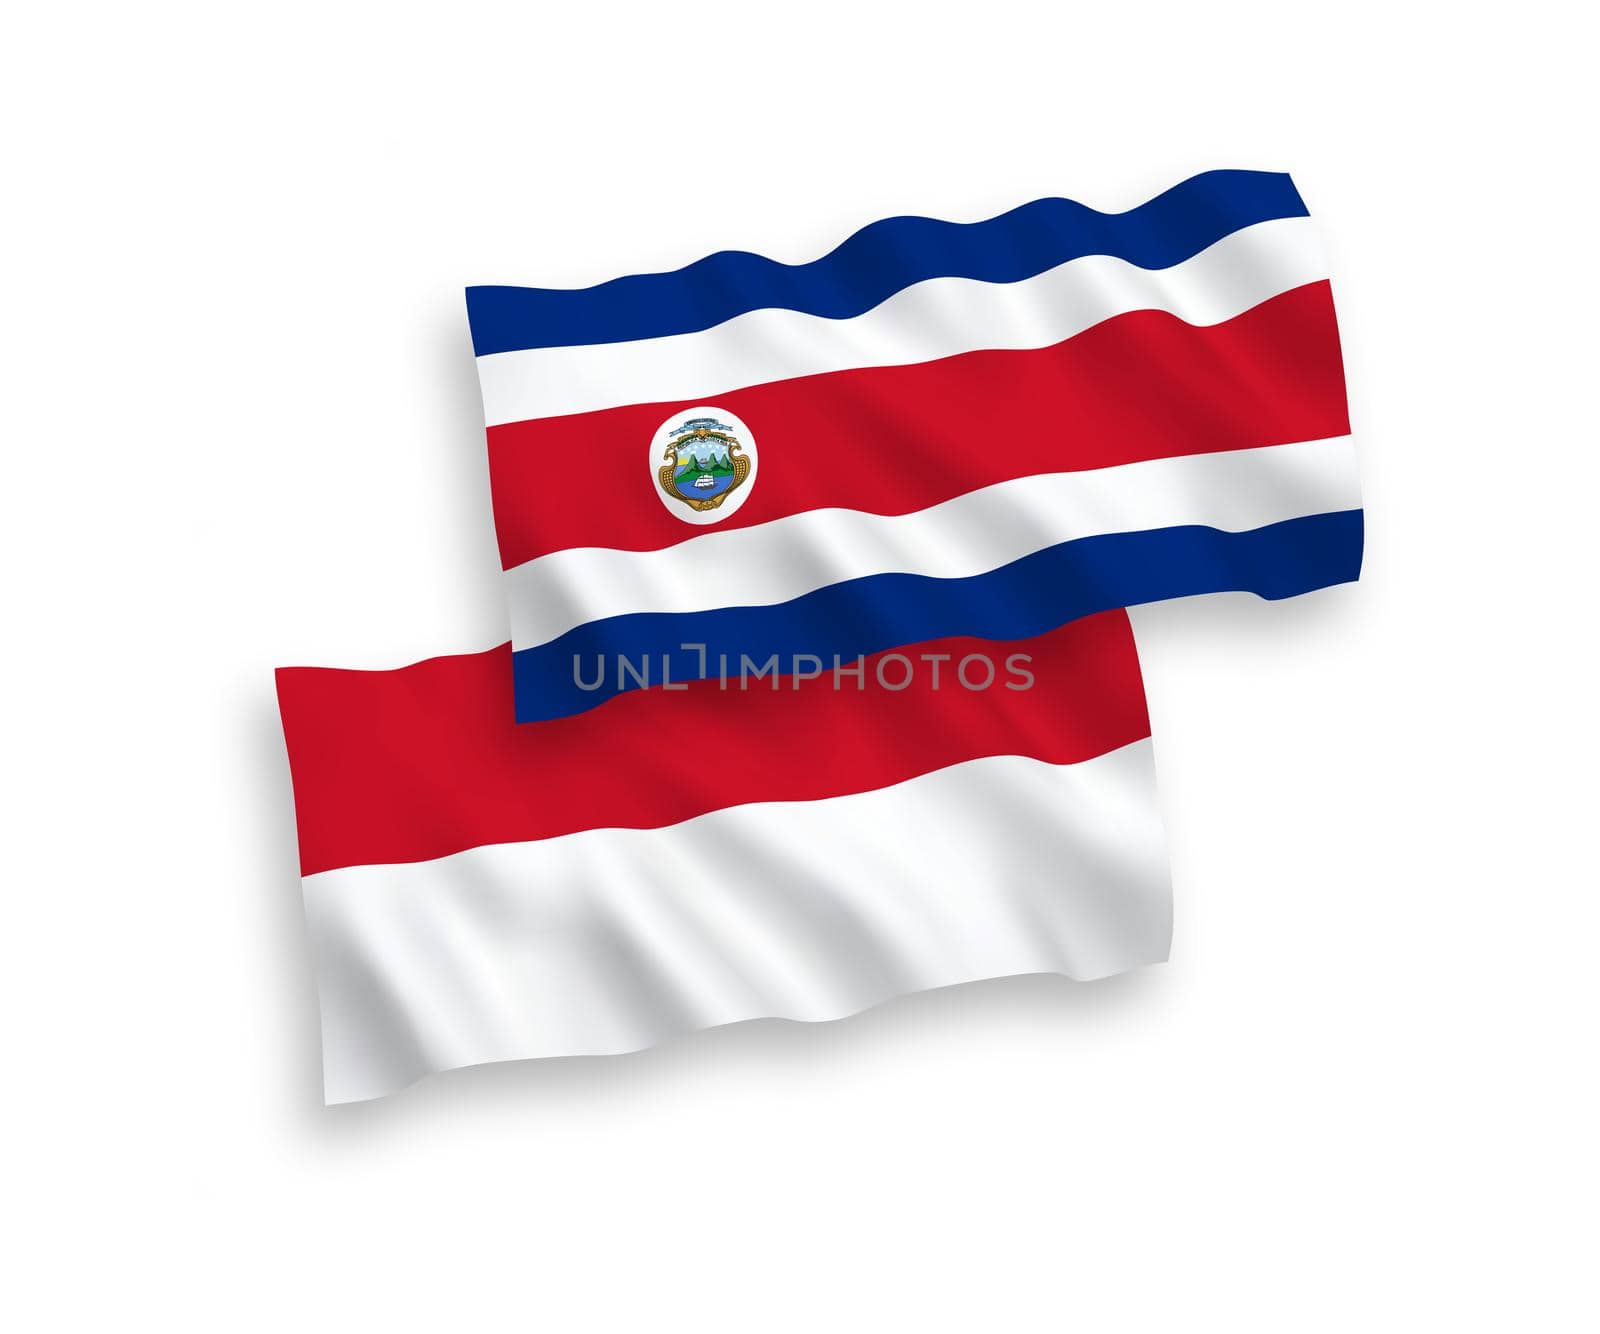 Flags of Indonesia and Republic of Costa Rica on a white background by epic33